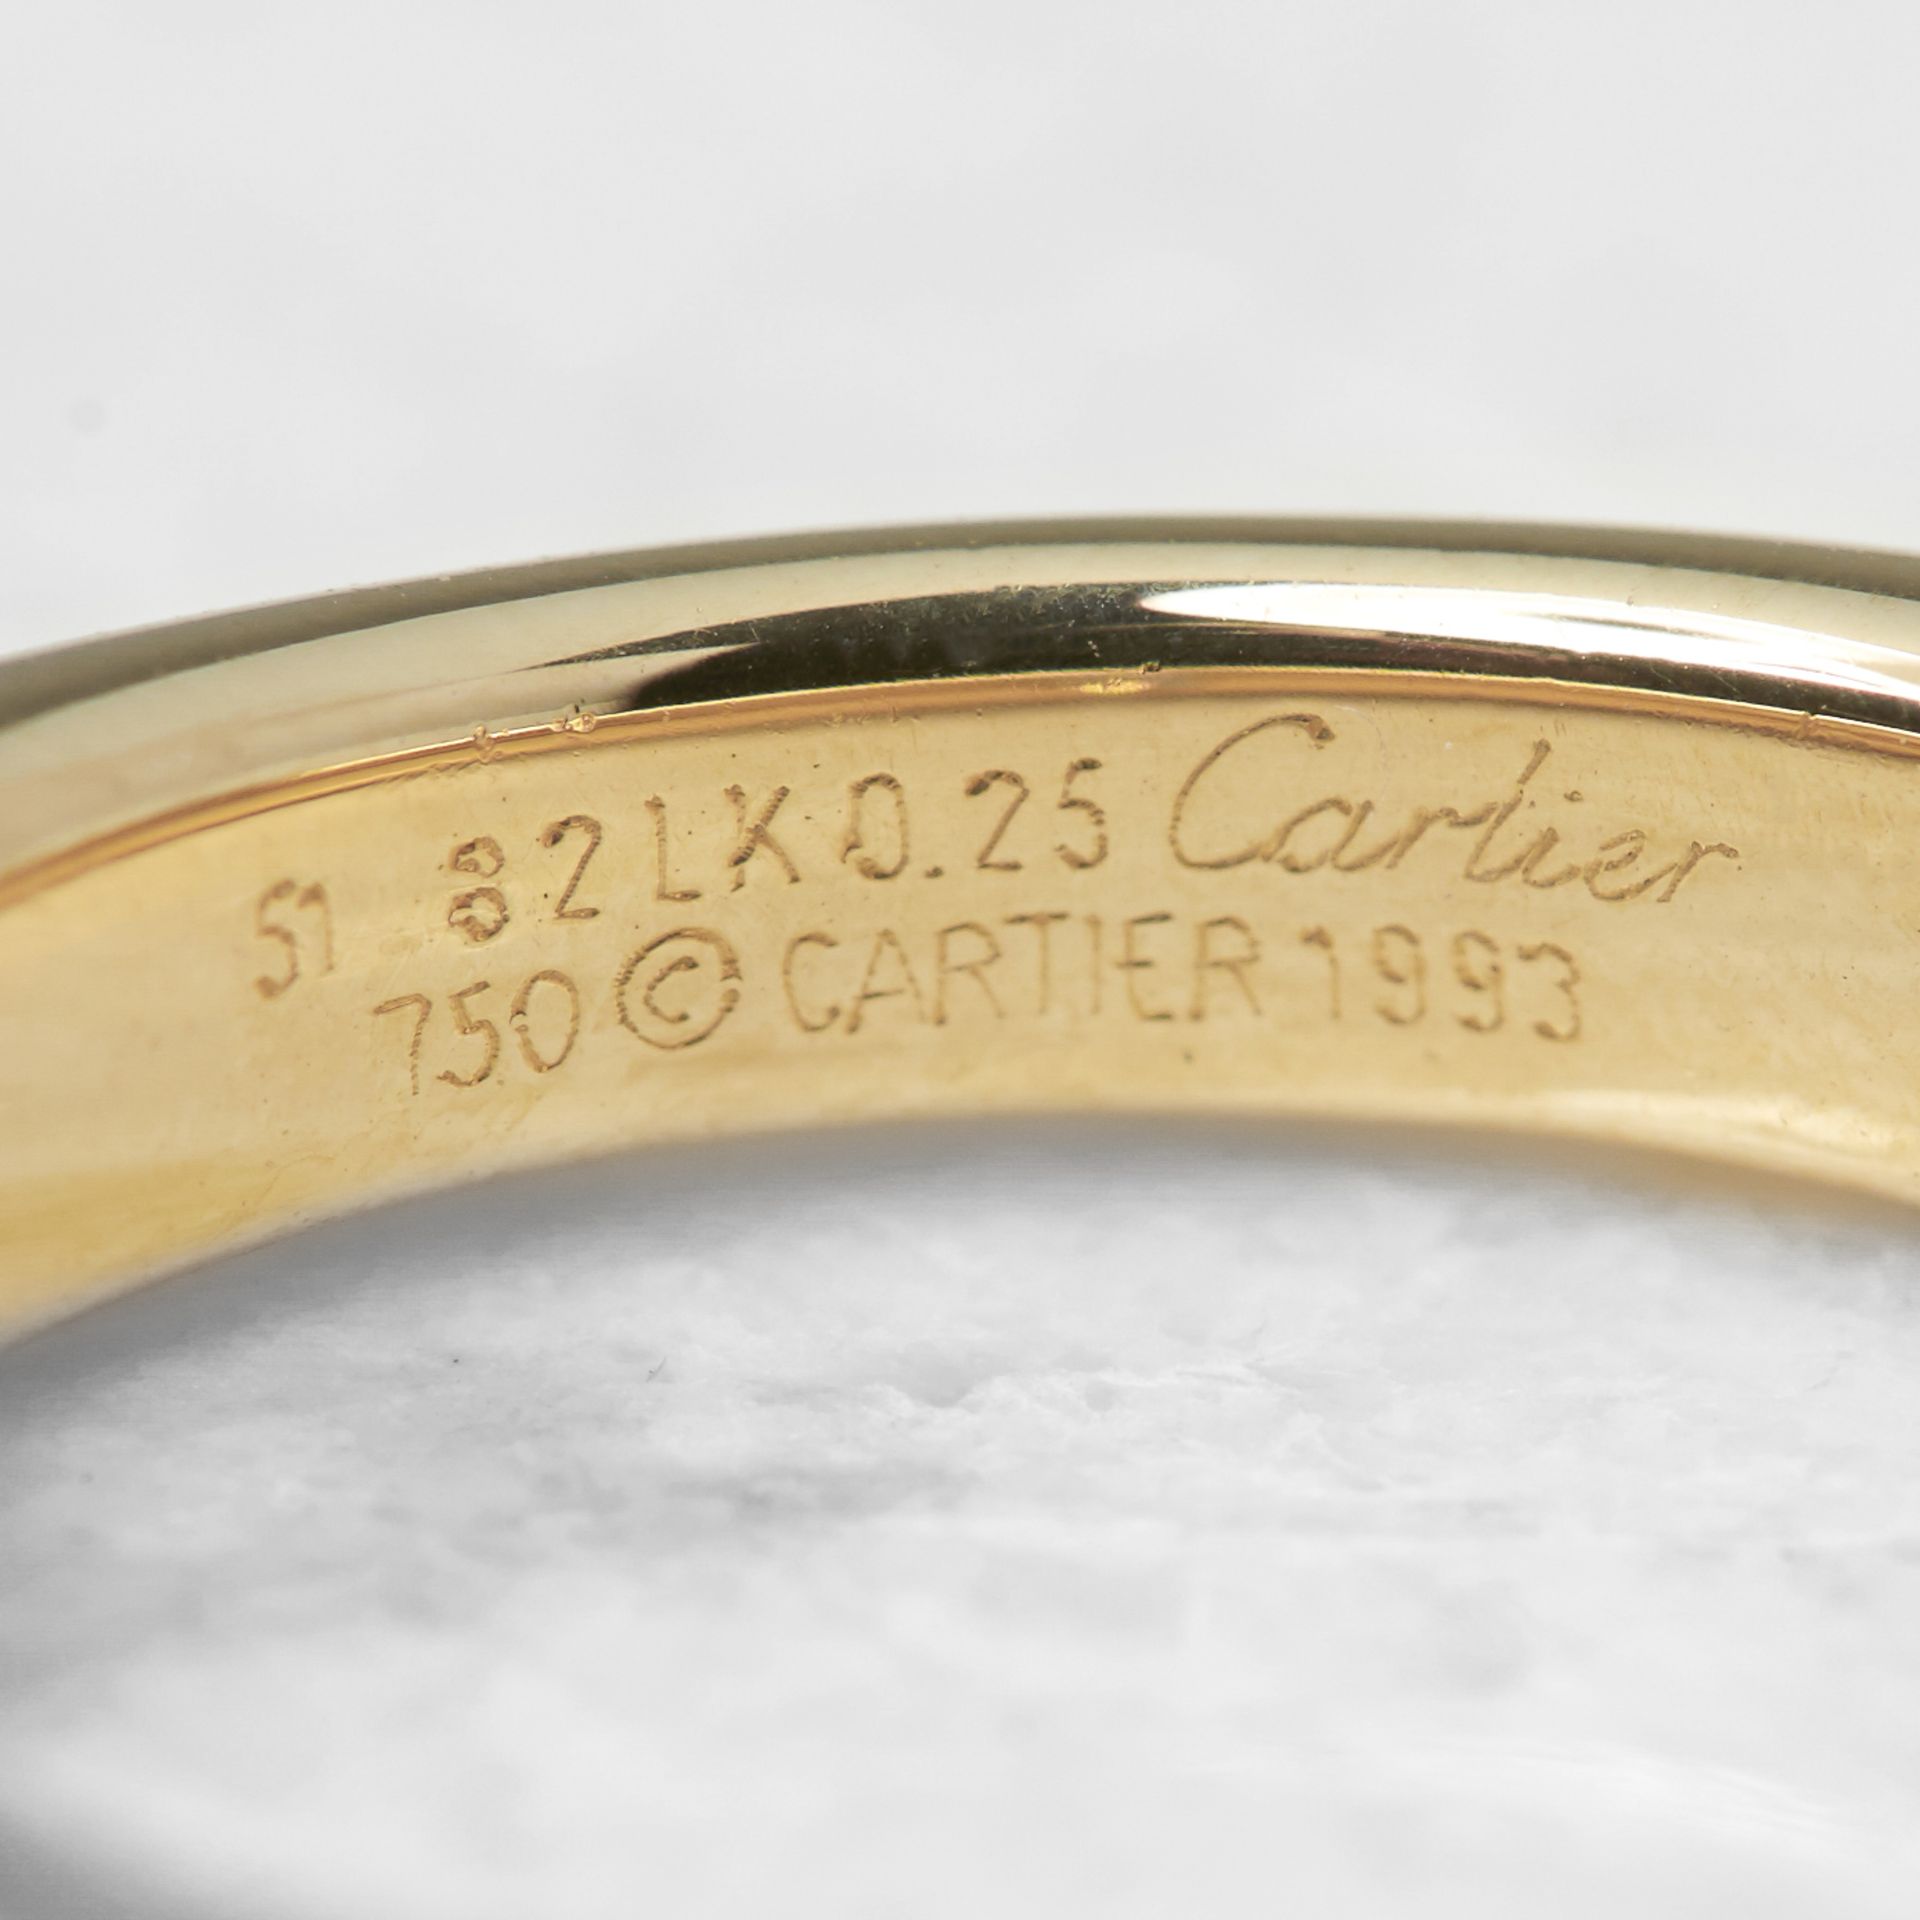 Cartier 18k Yellow Gold 0.25ct Diamond Stackable Elipse Ring - Image 6 of 6